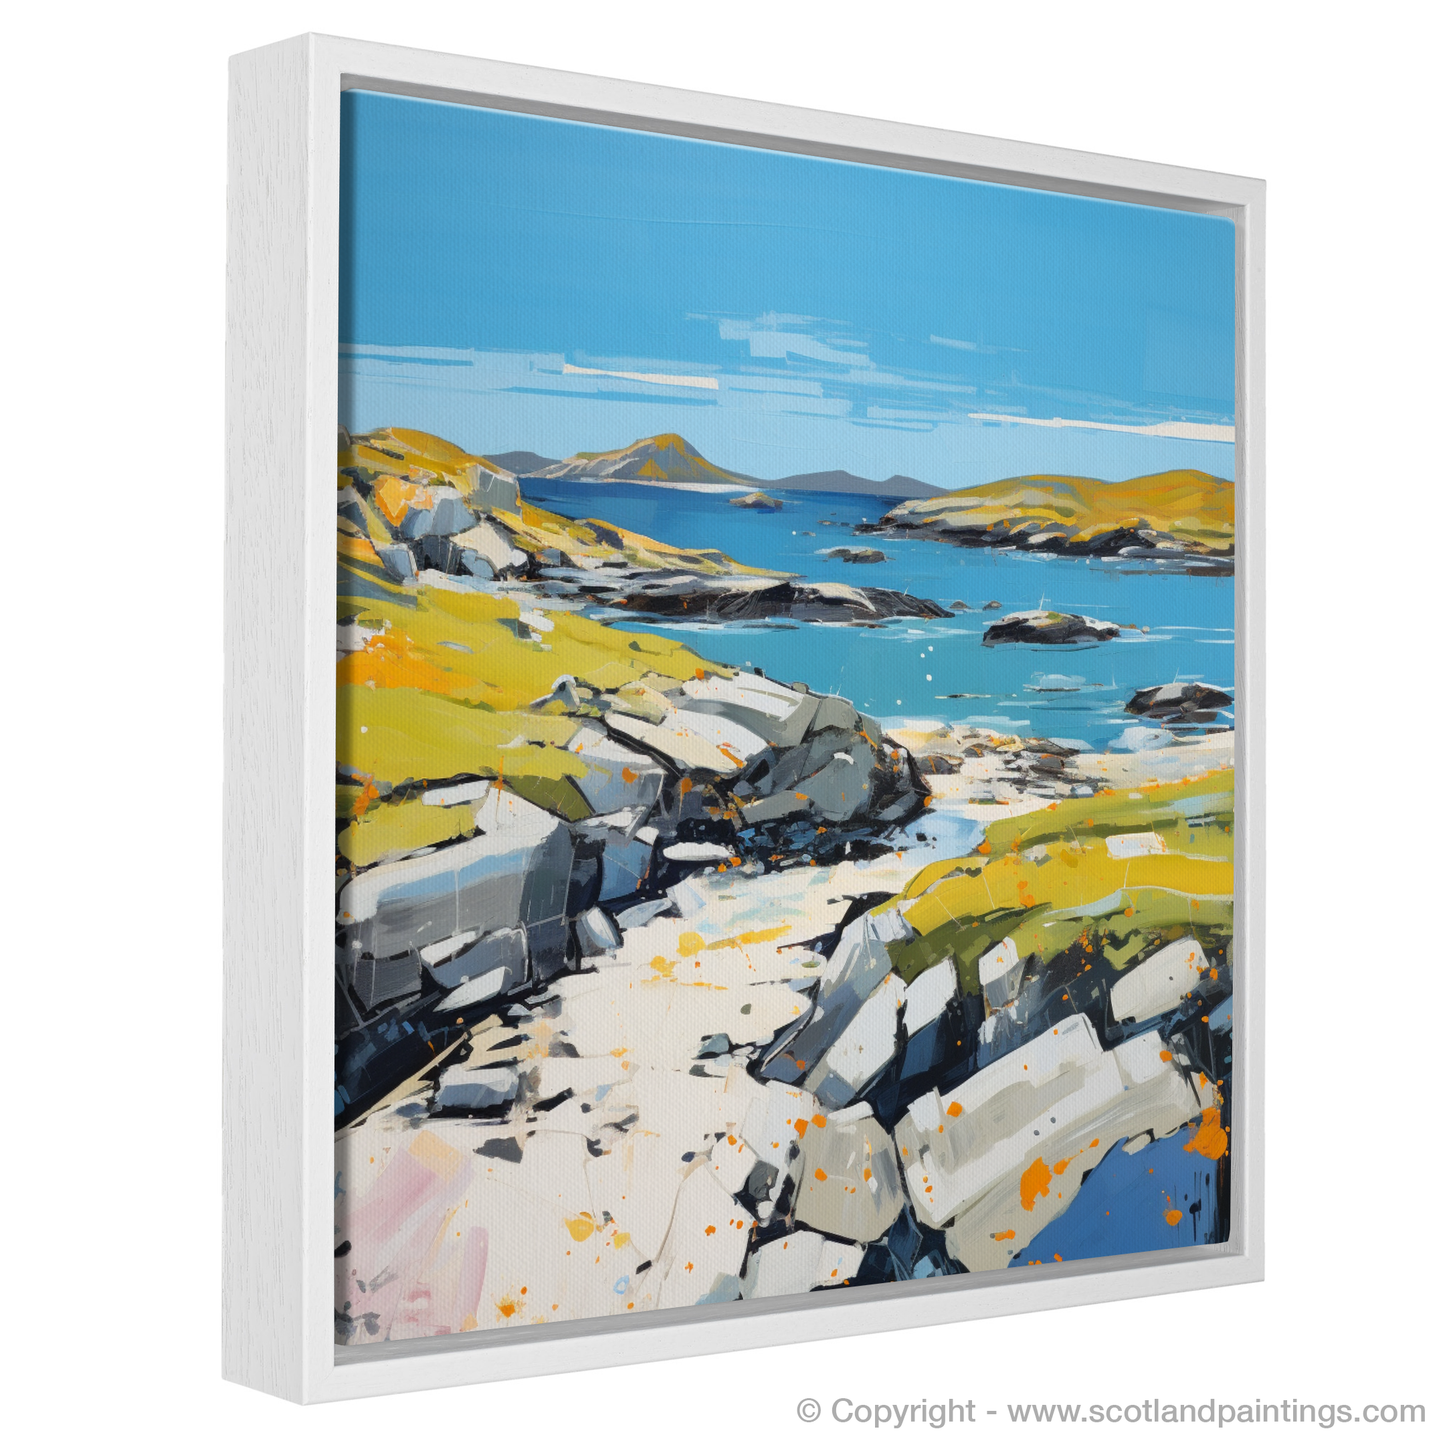 Painting and Art Print of Isle of Harris, Outer Hebrides in summer entitled "Summer Vibrance on the Isle of Harris".